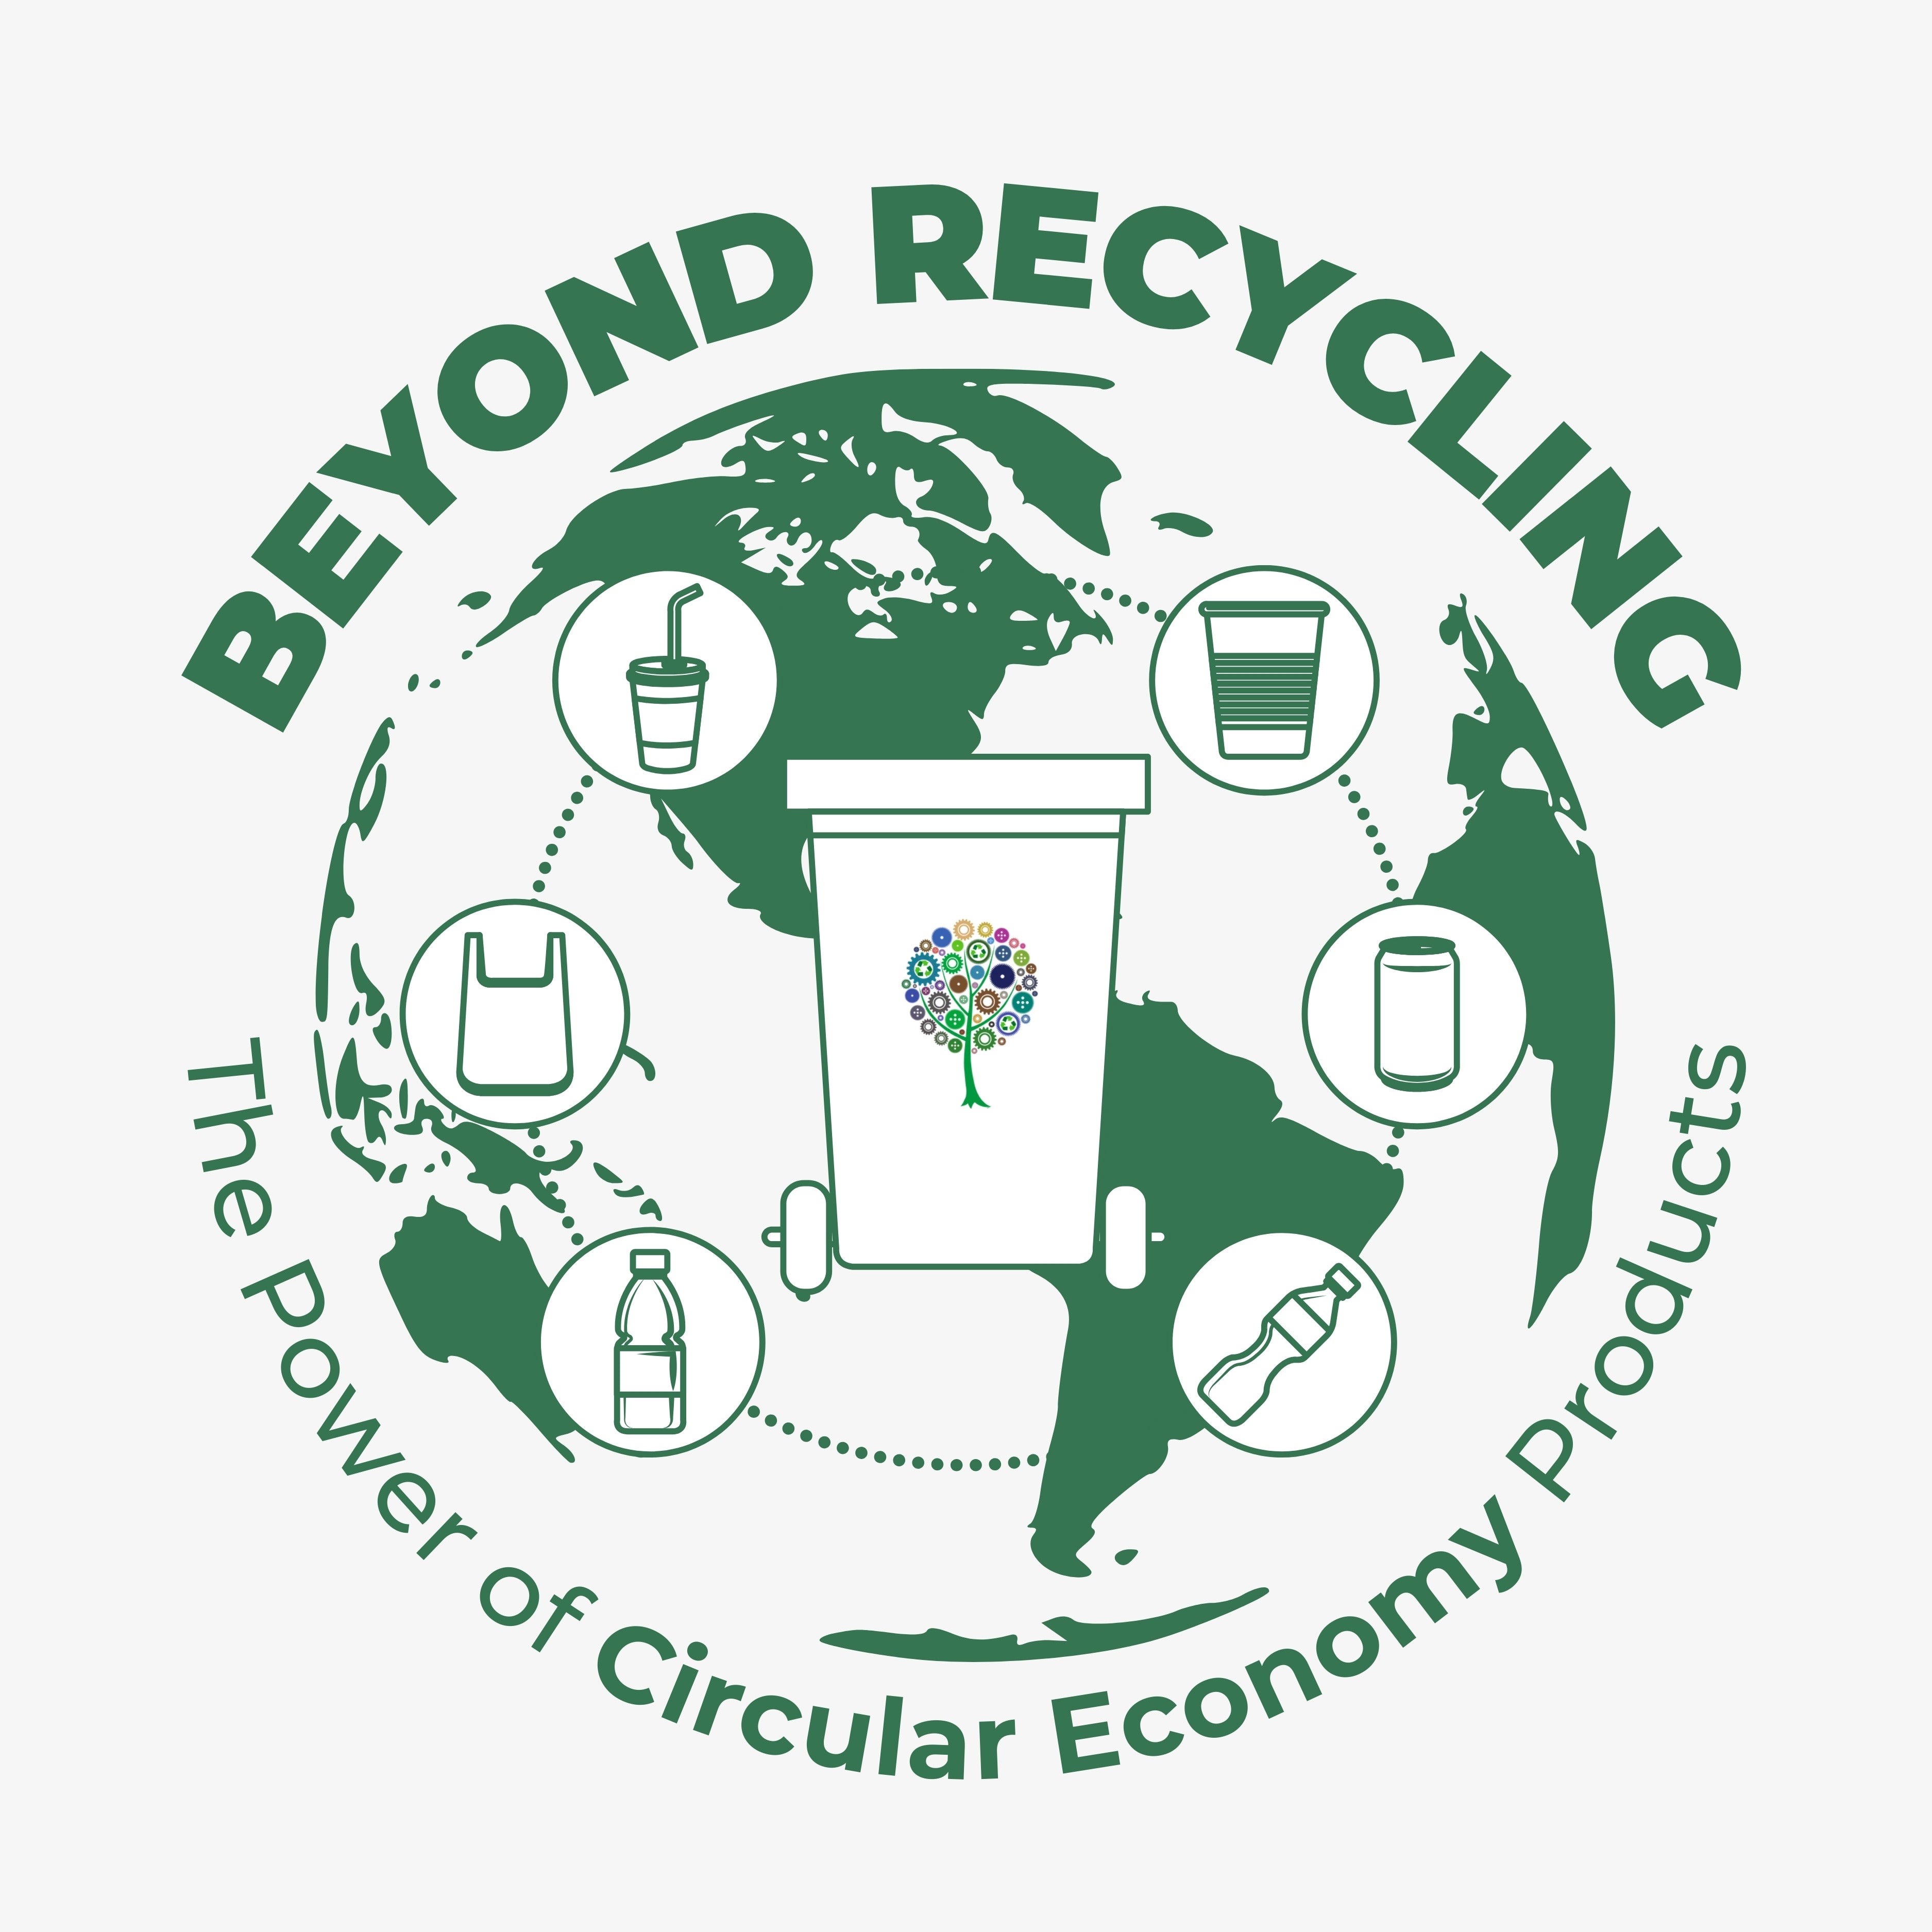 Beyond Recycling- The Power of Circular Economy Products